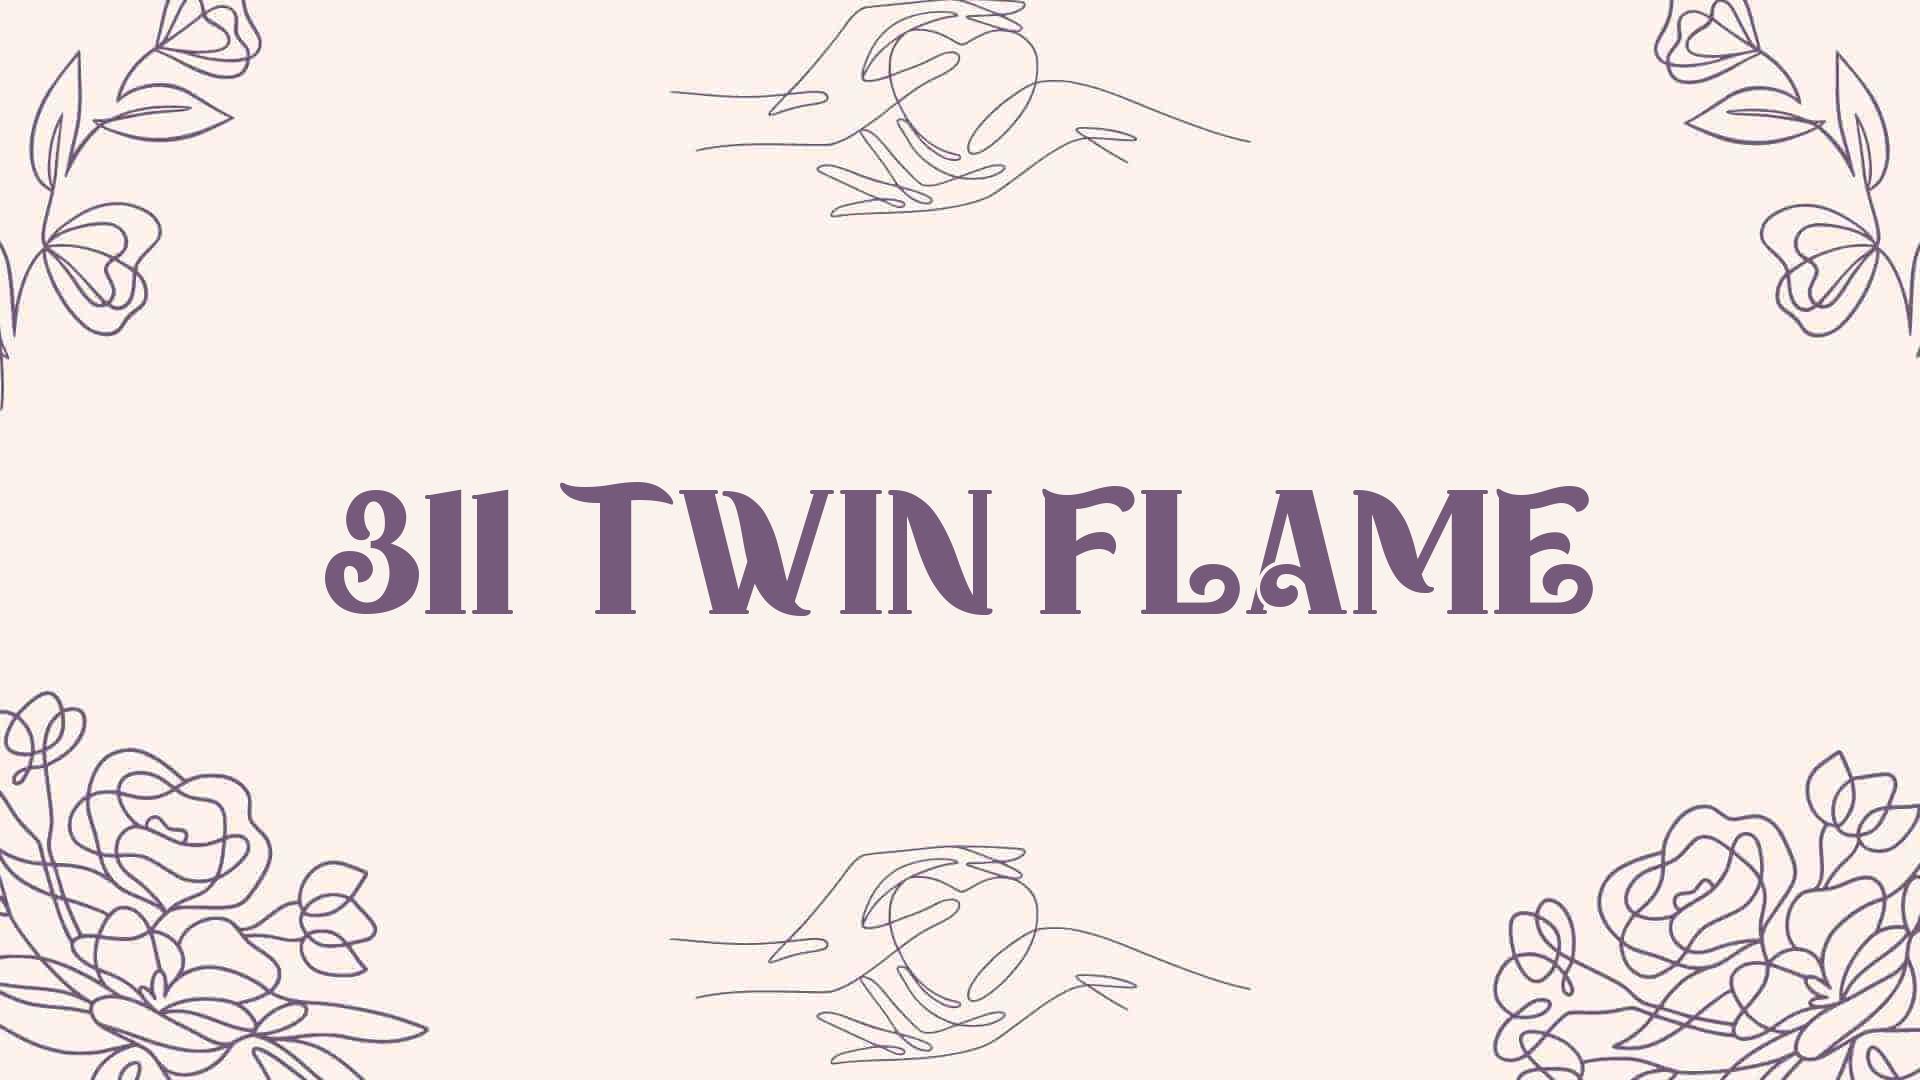 311 twin flame [ Meaning Revealed ]